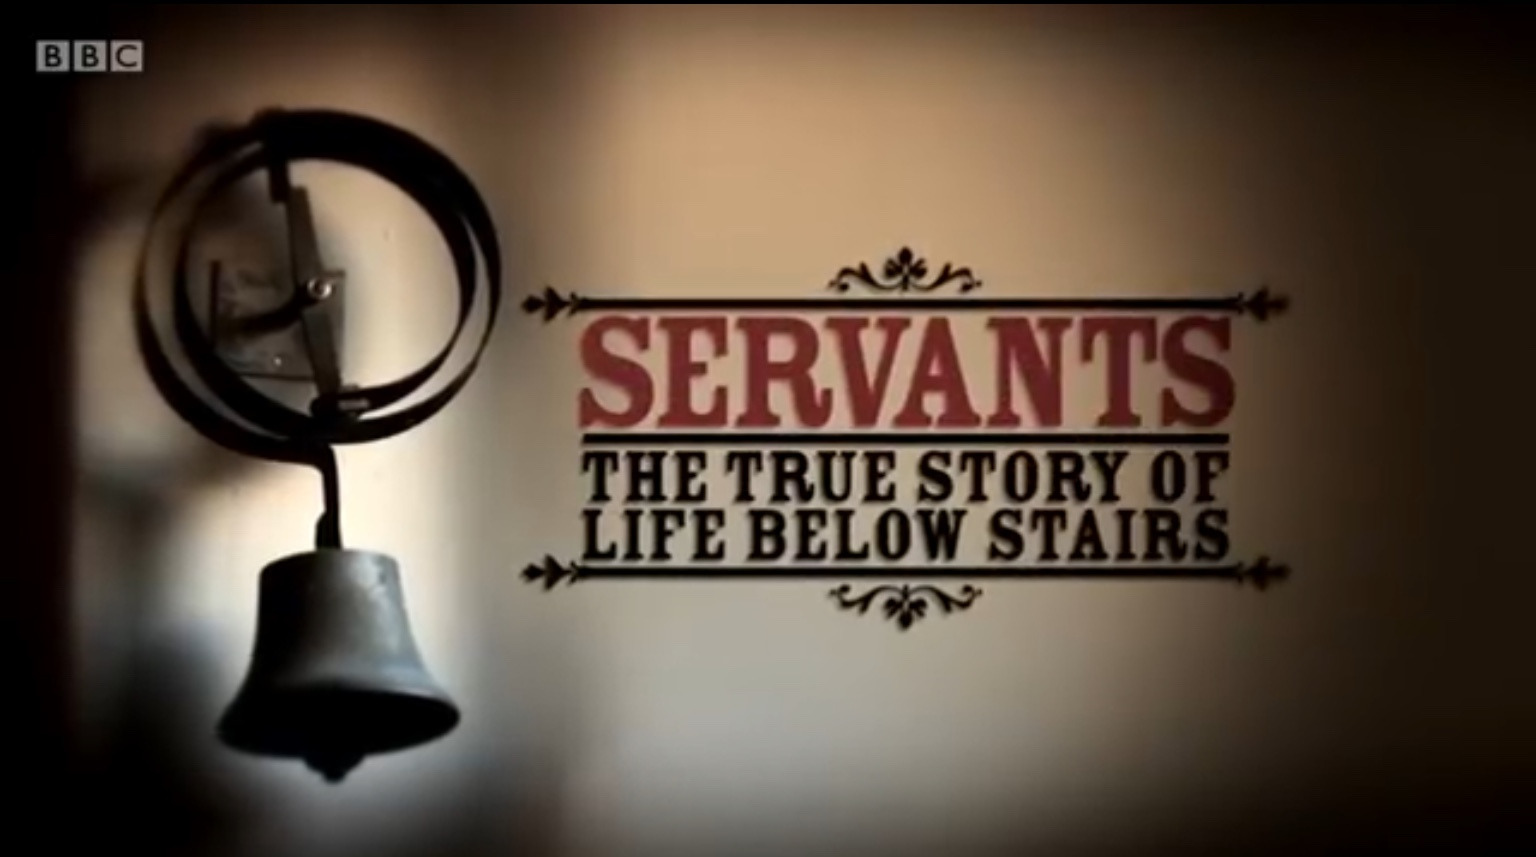 Show Servants: The True Story of Life Below Stairs